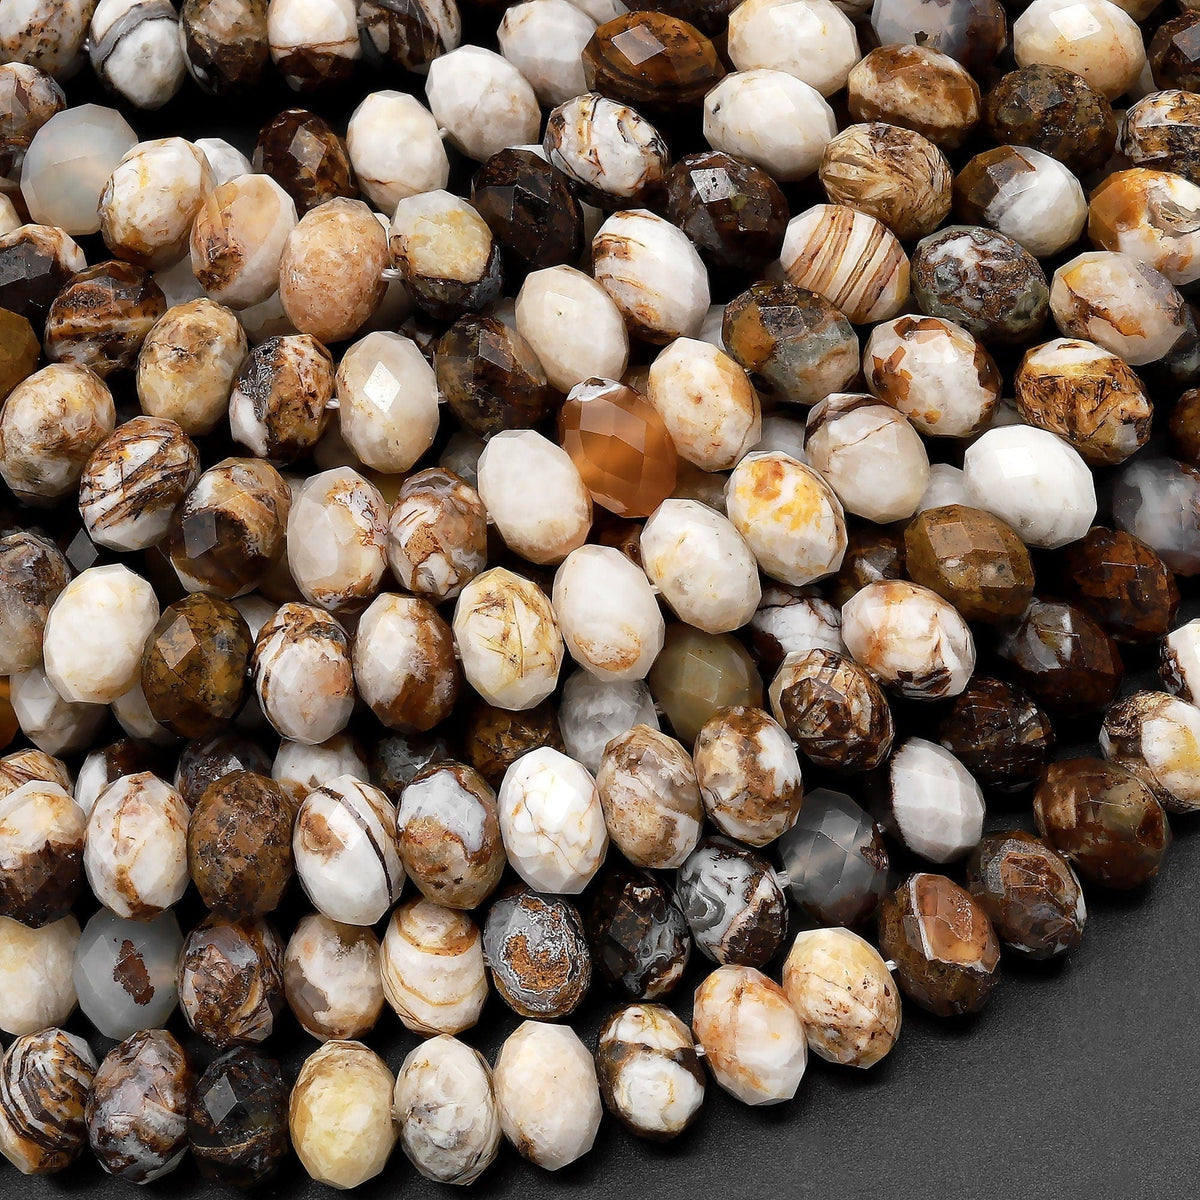 Natural Petrified Wood 8mm Beads Faceted Rounded Gemstone Prism